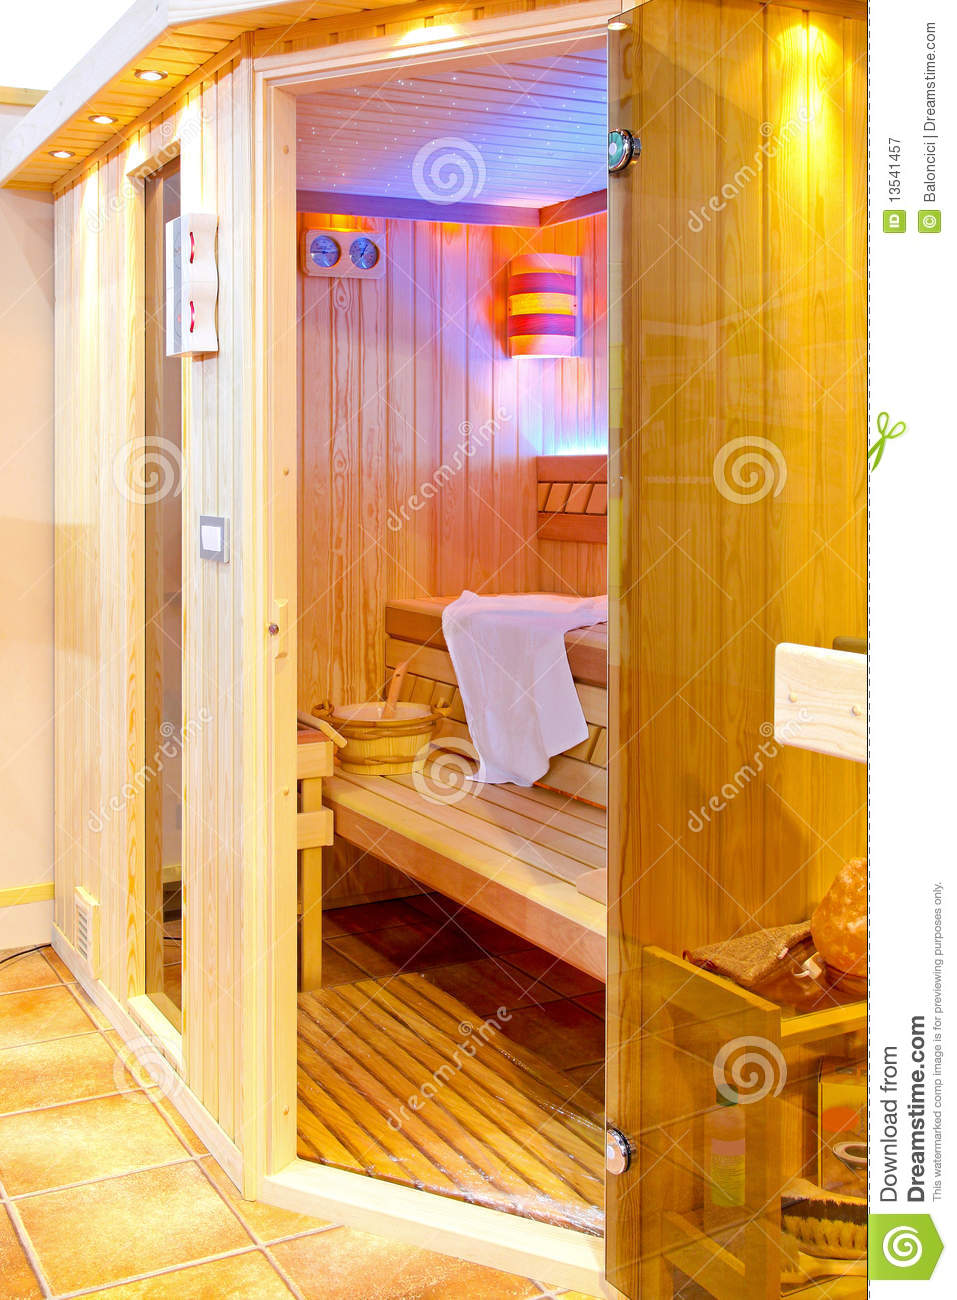 Steam Room Royalty Free Stock Photography   Image  13541457